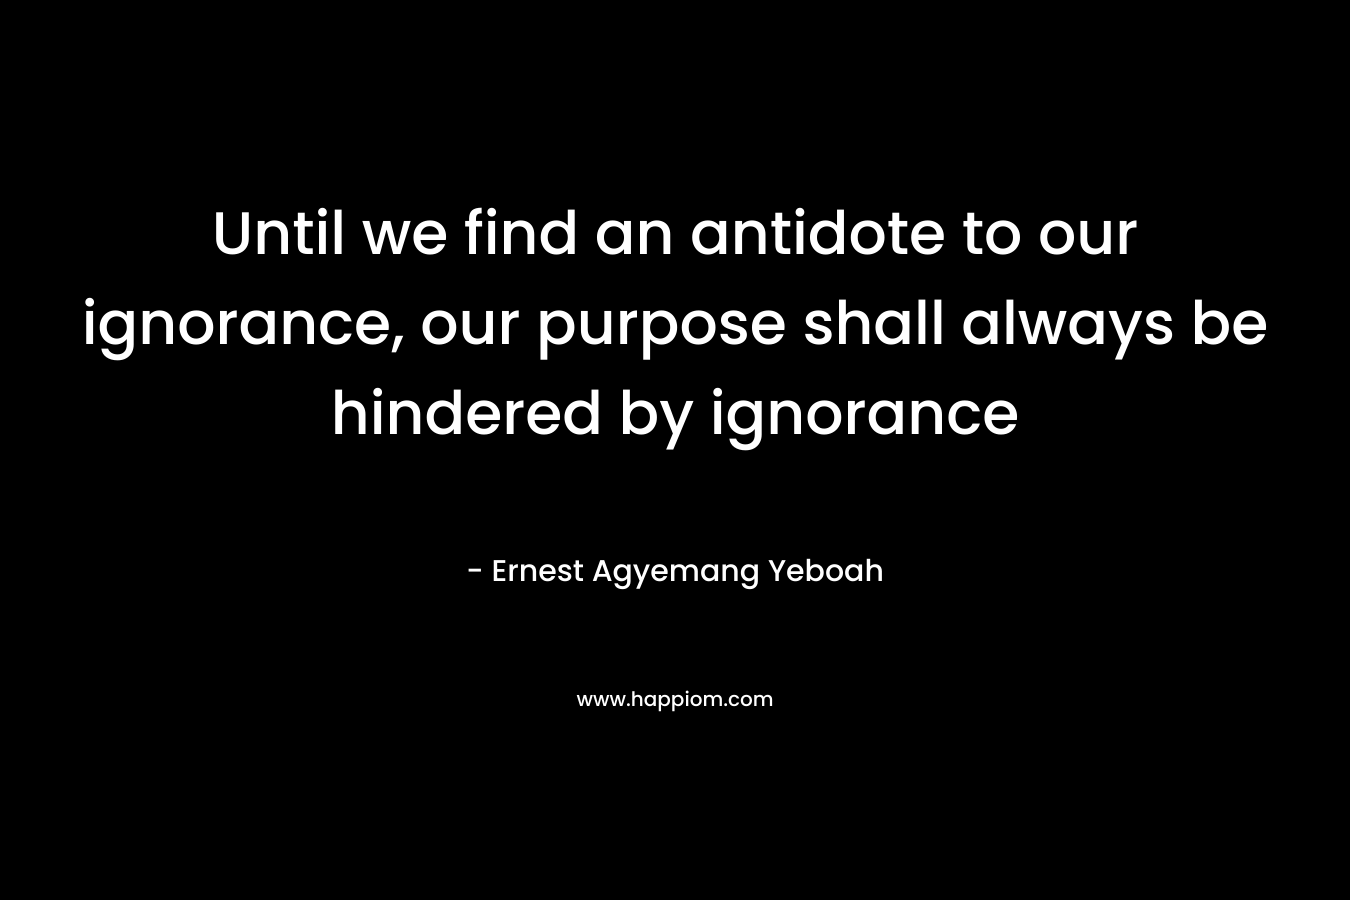 Until we find an antidote to our ignorance, our purpose shall always be hindered by ignorance